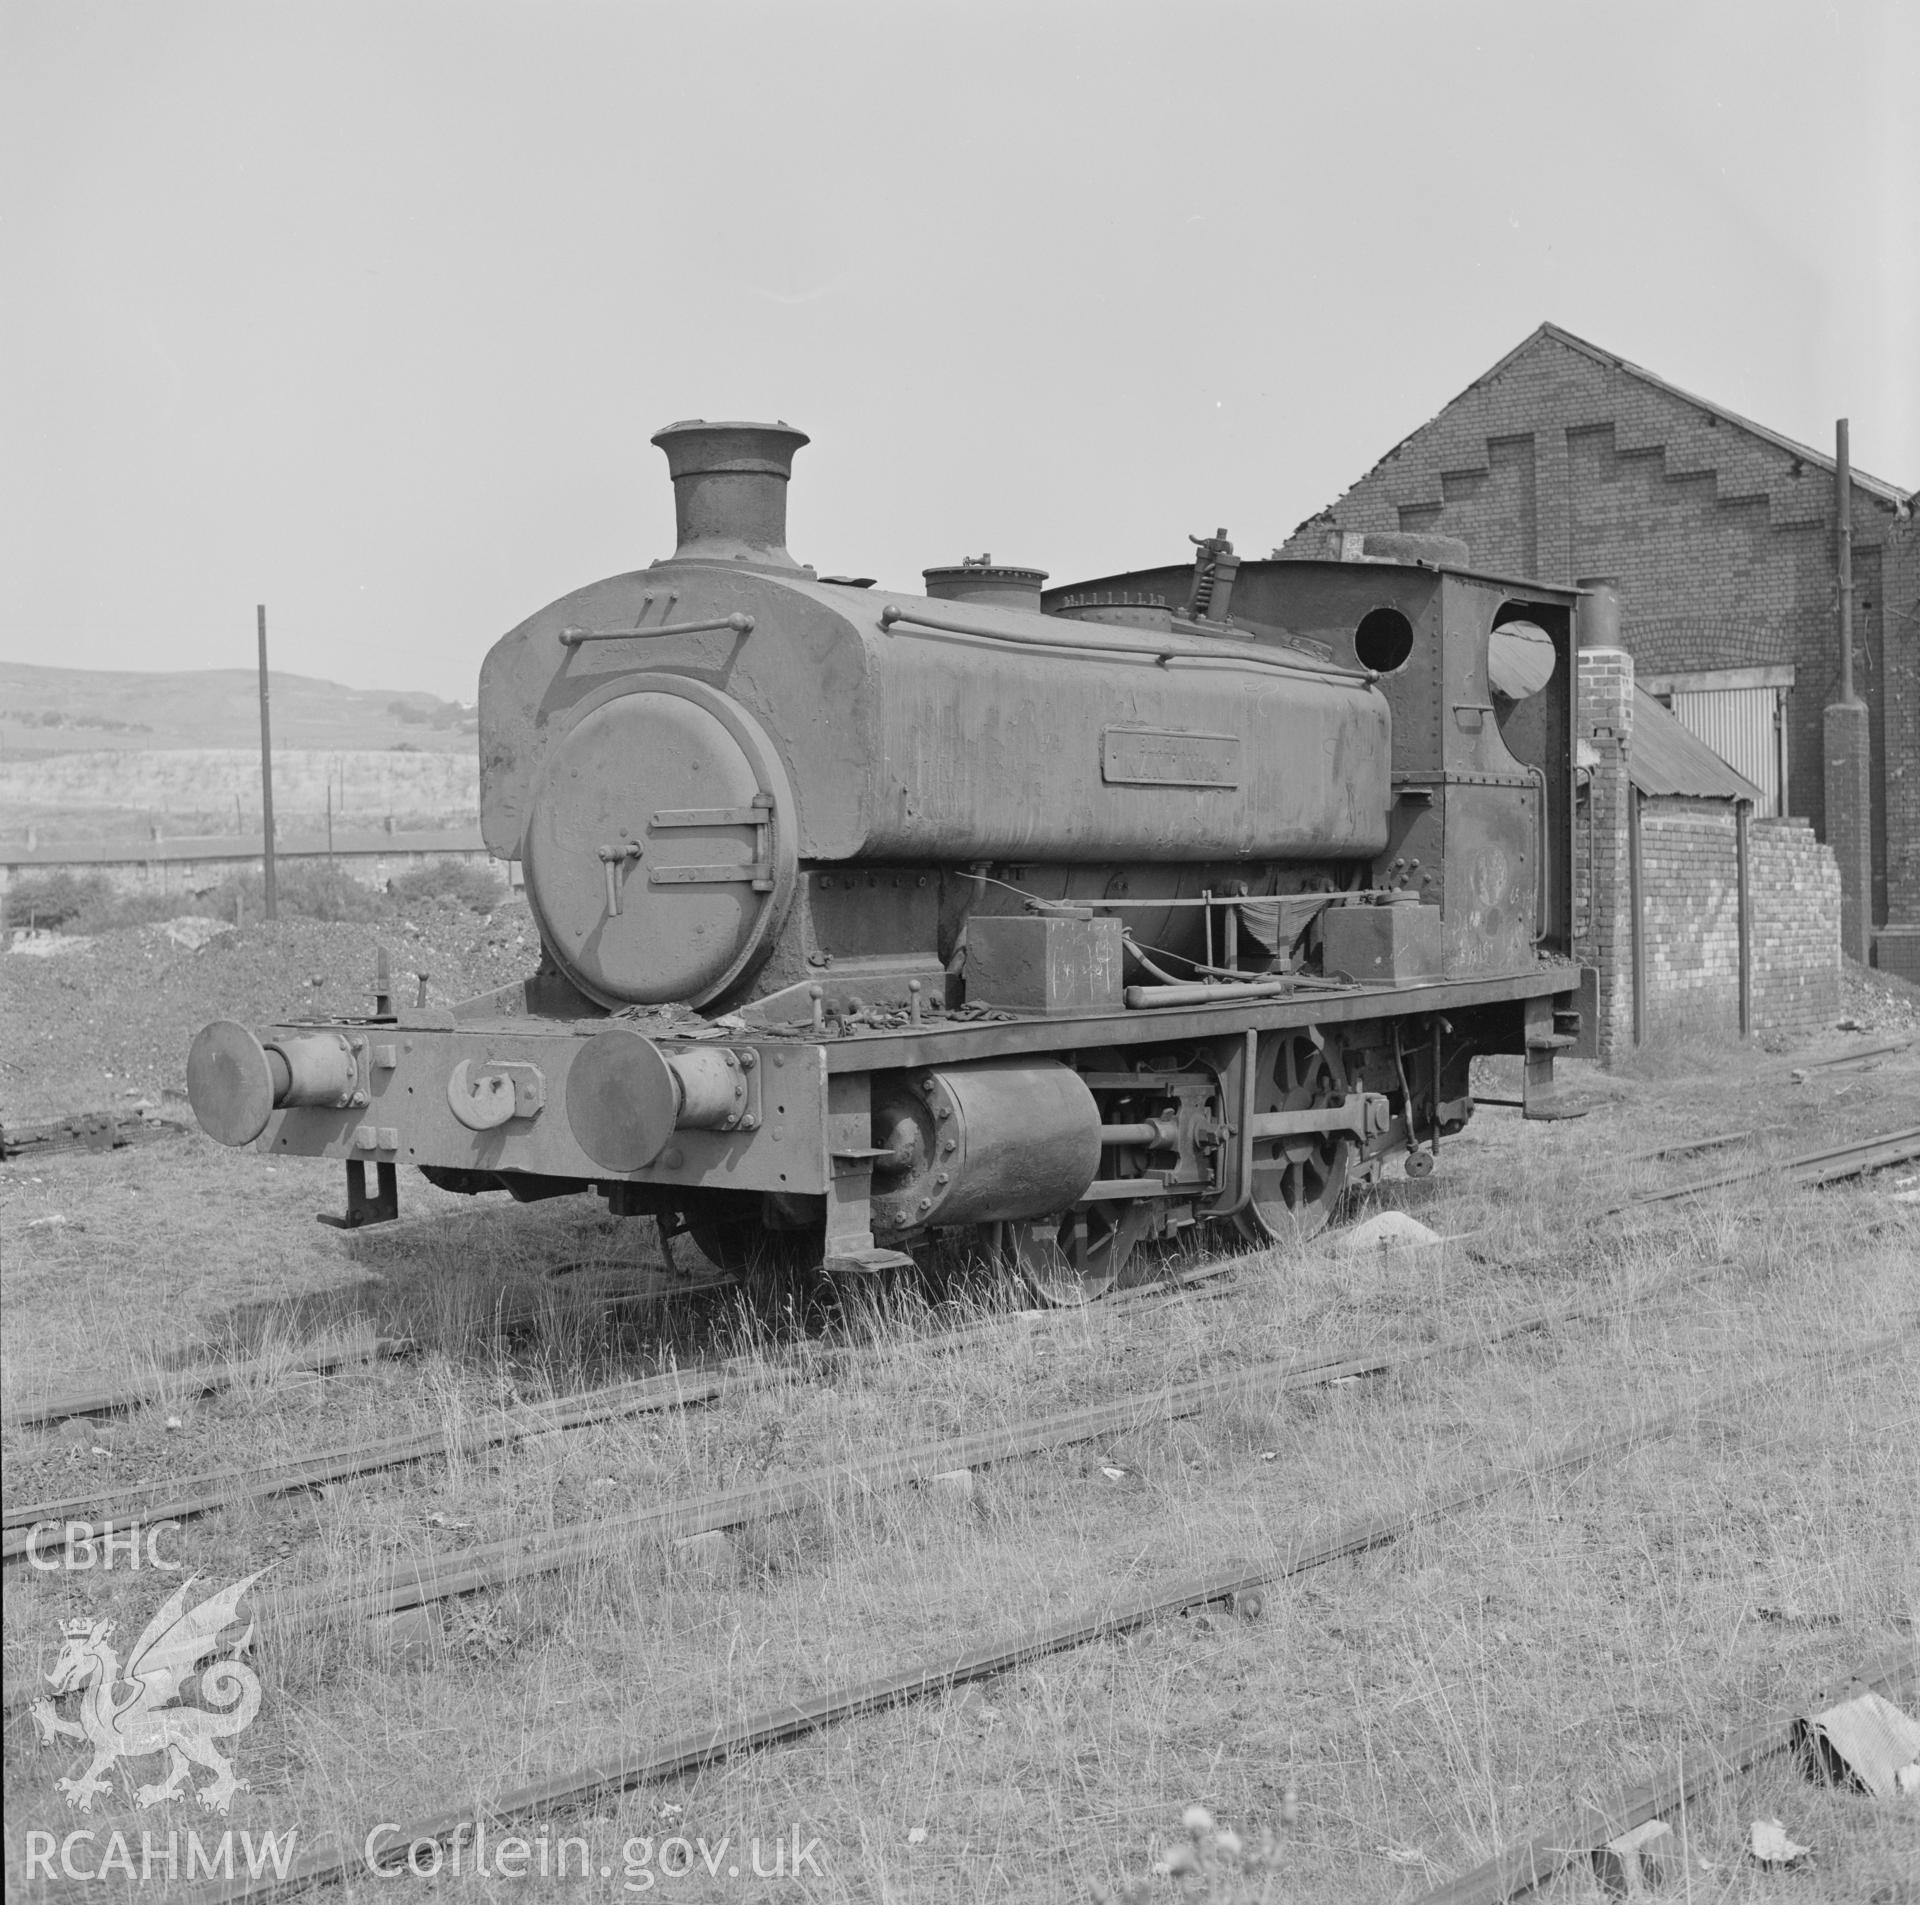 Digital copy of an acetate negative showing steam loco outside engine shed at Big Pit, from the John Cornwell Collection.